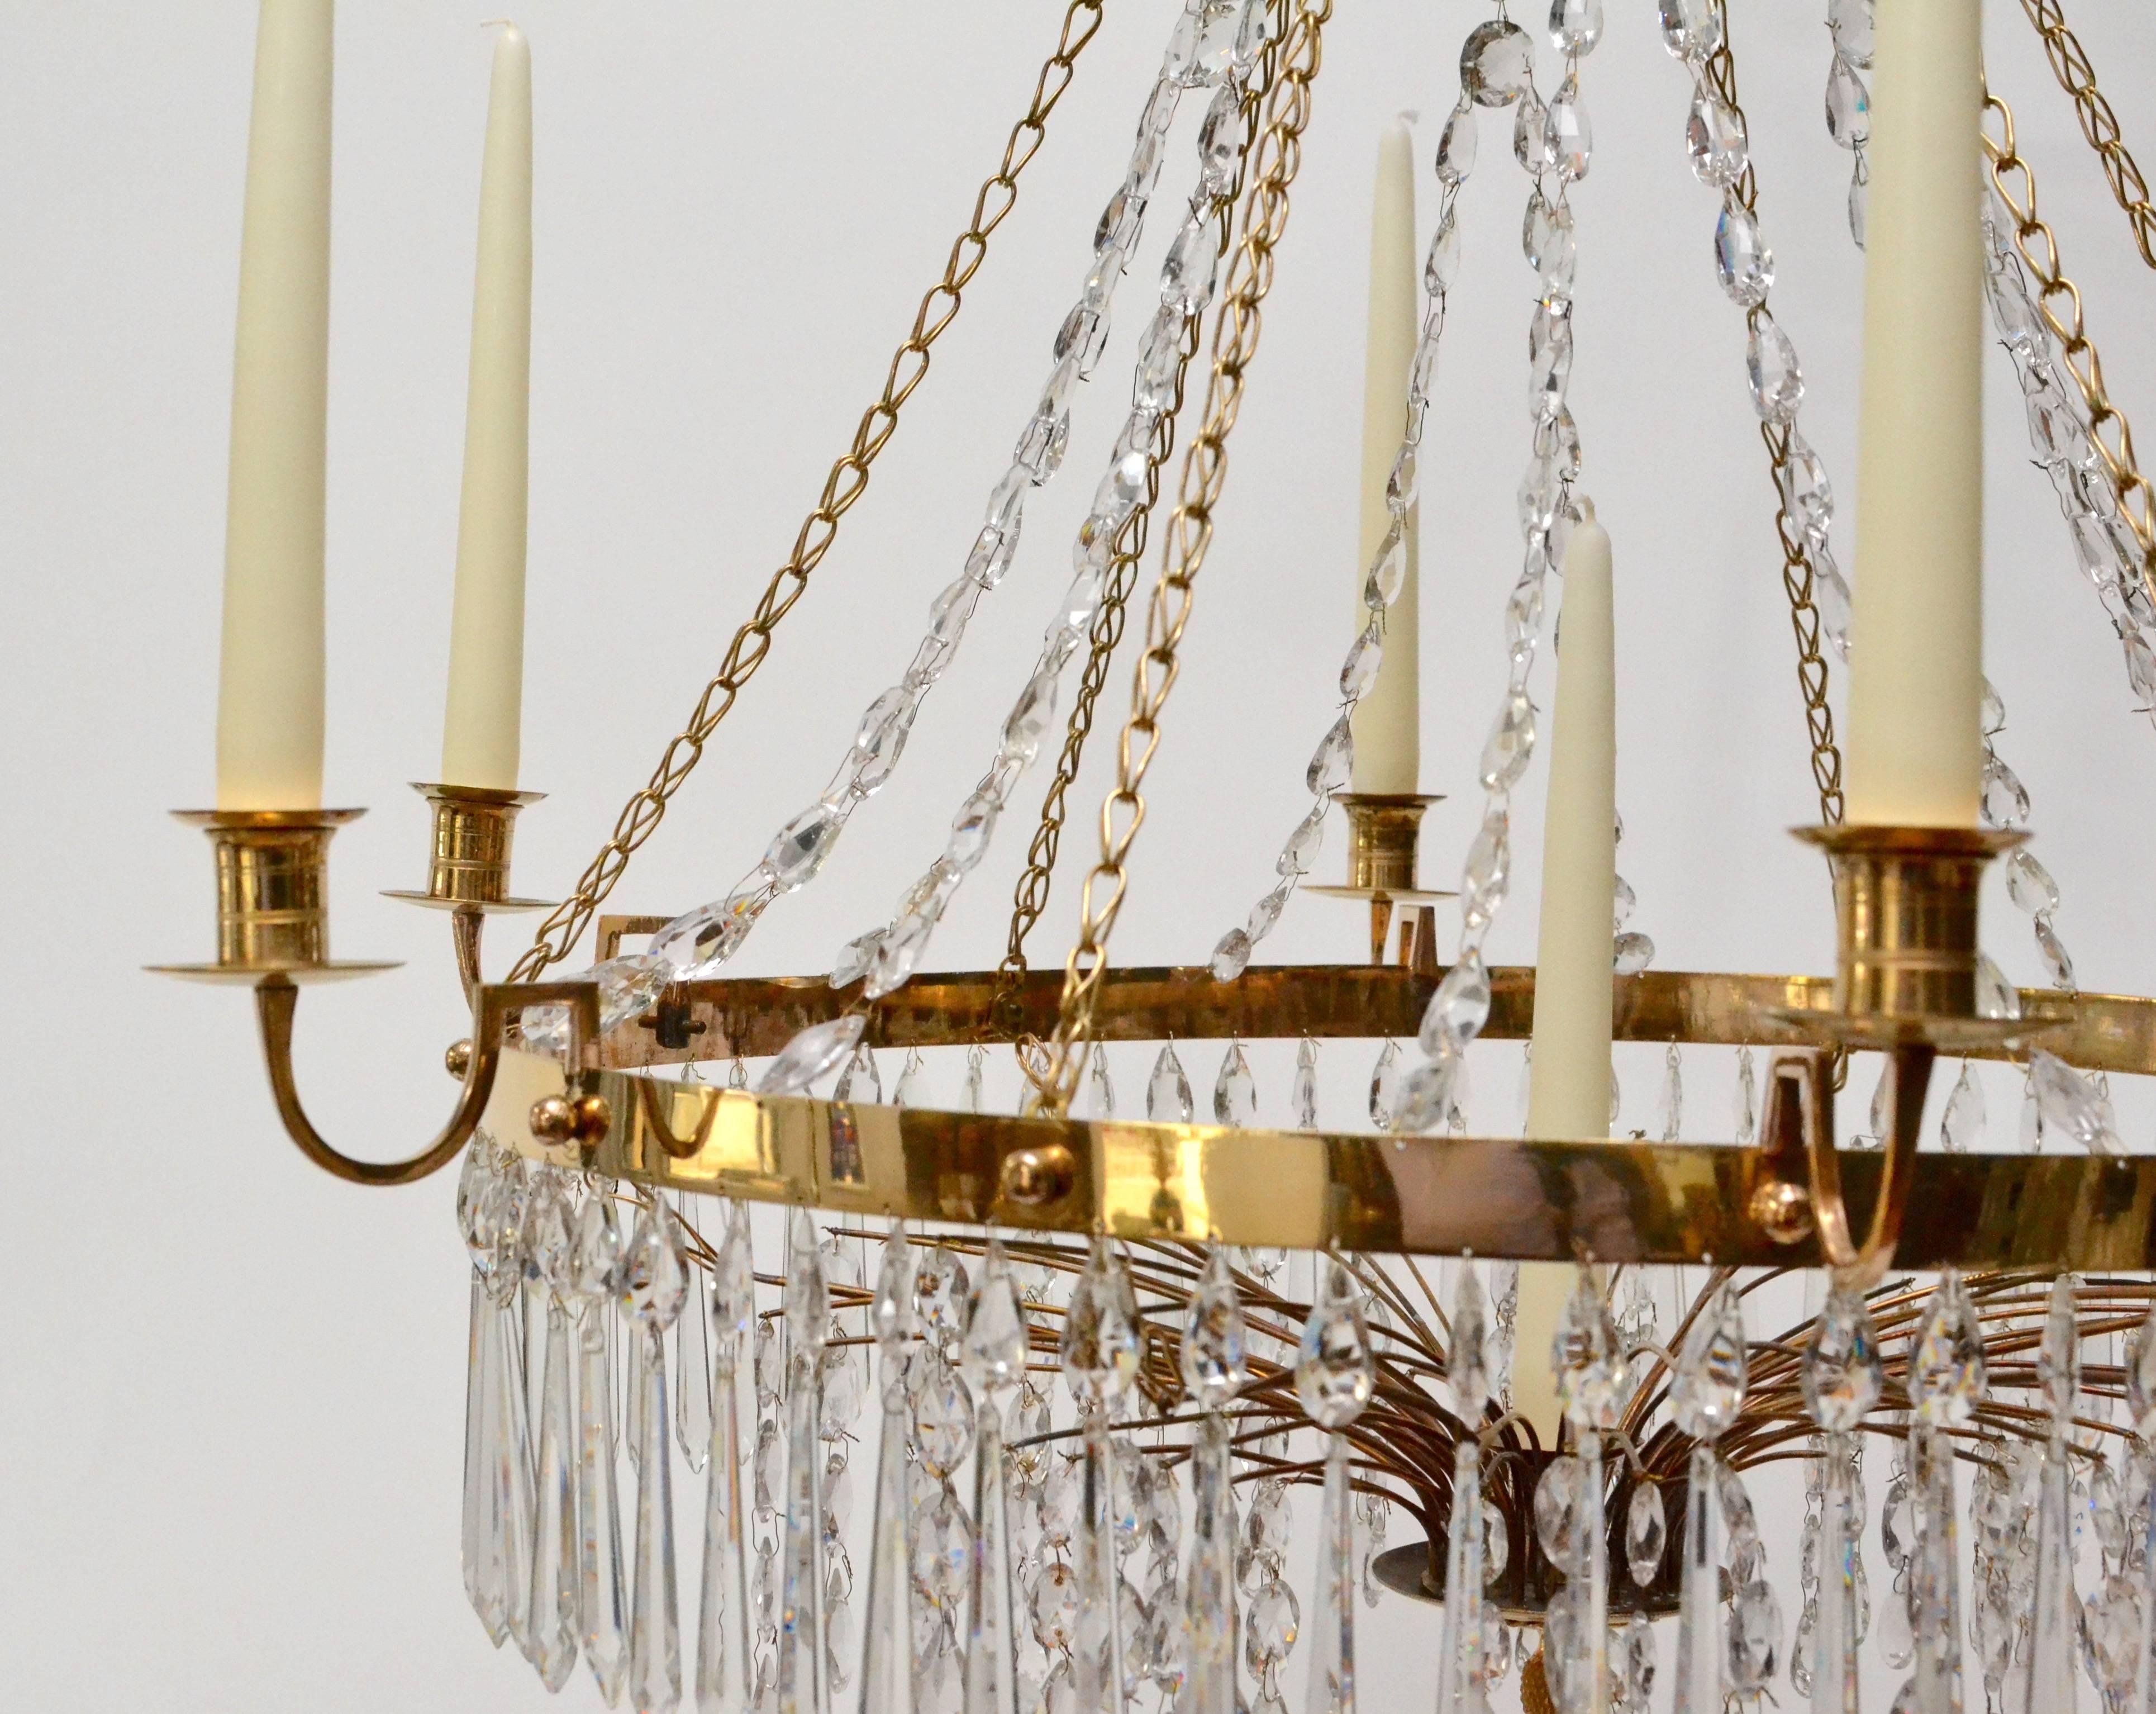 Early 19th Century Swedish Gustavian Chandelier from circa 1800